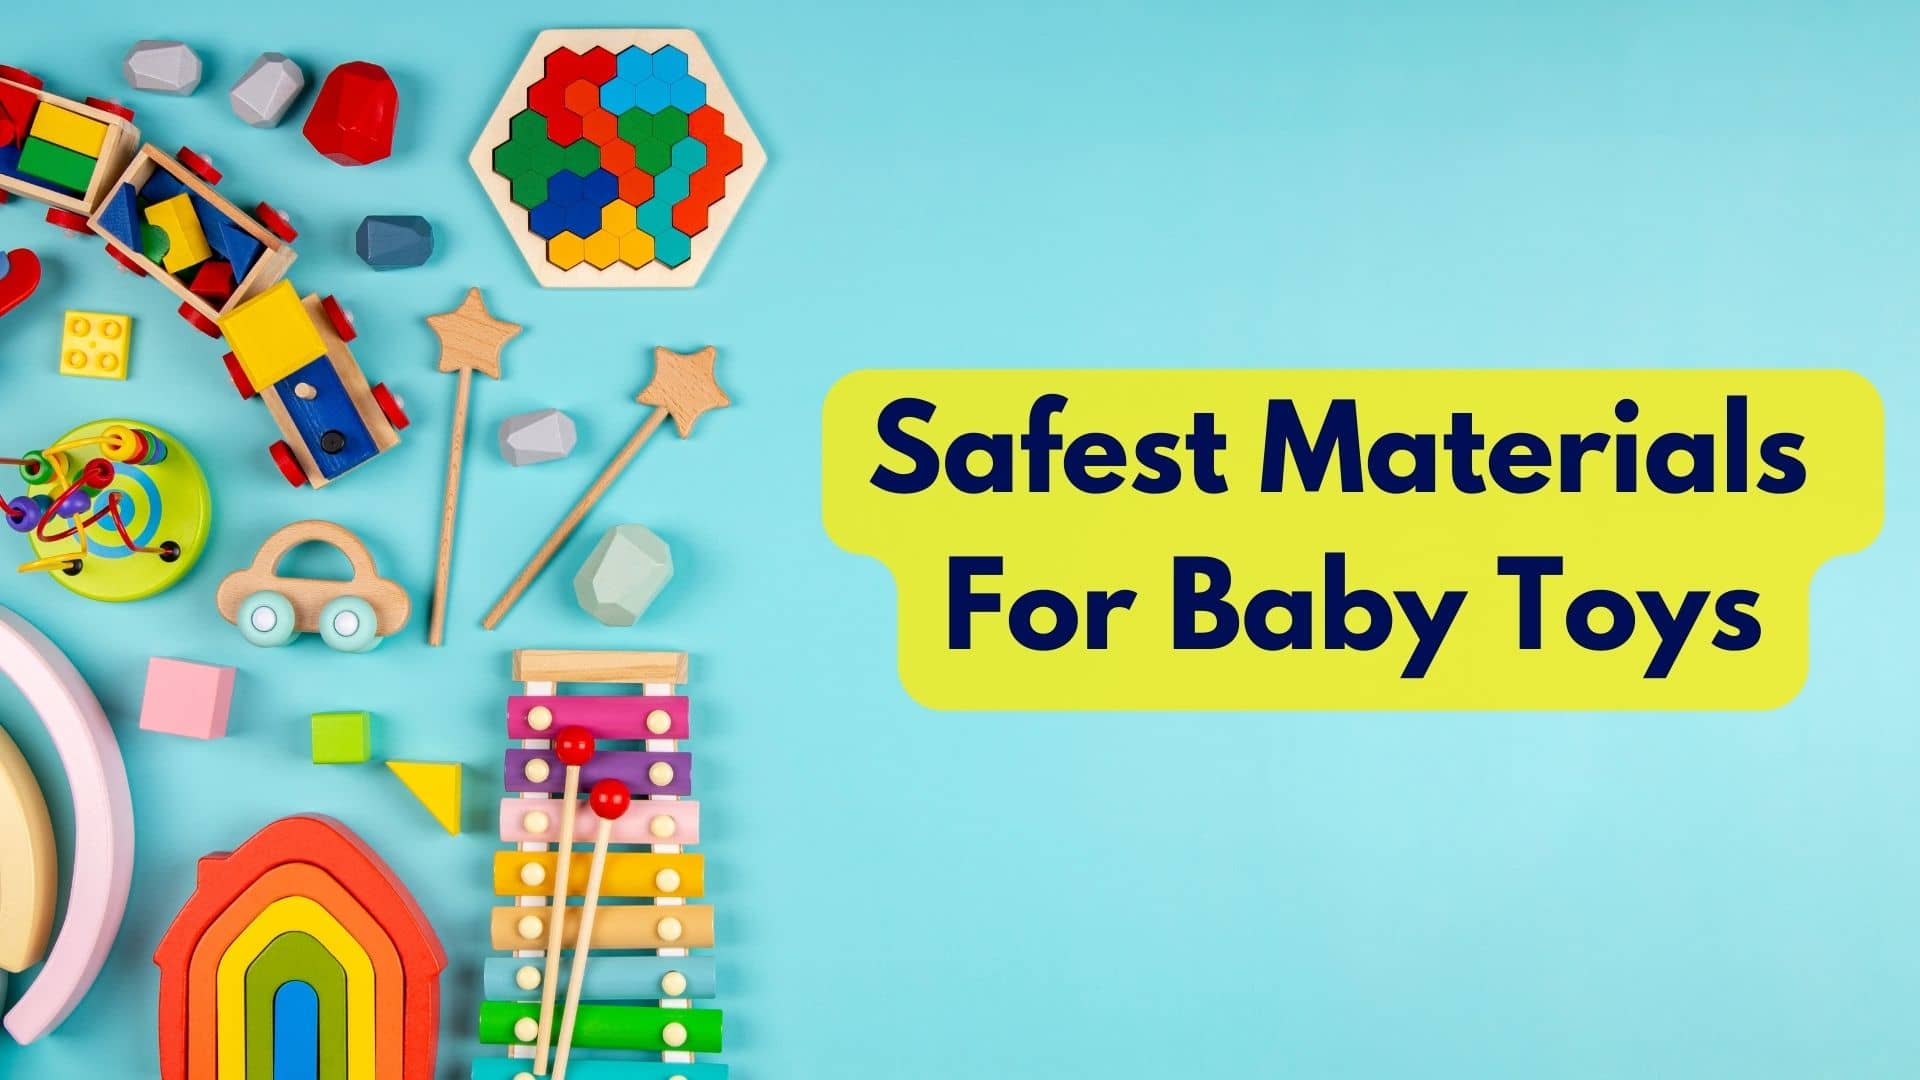 What Are The Safest Materials For Baby Toys?